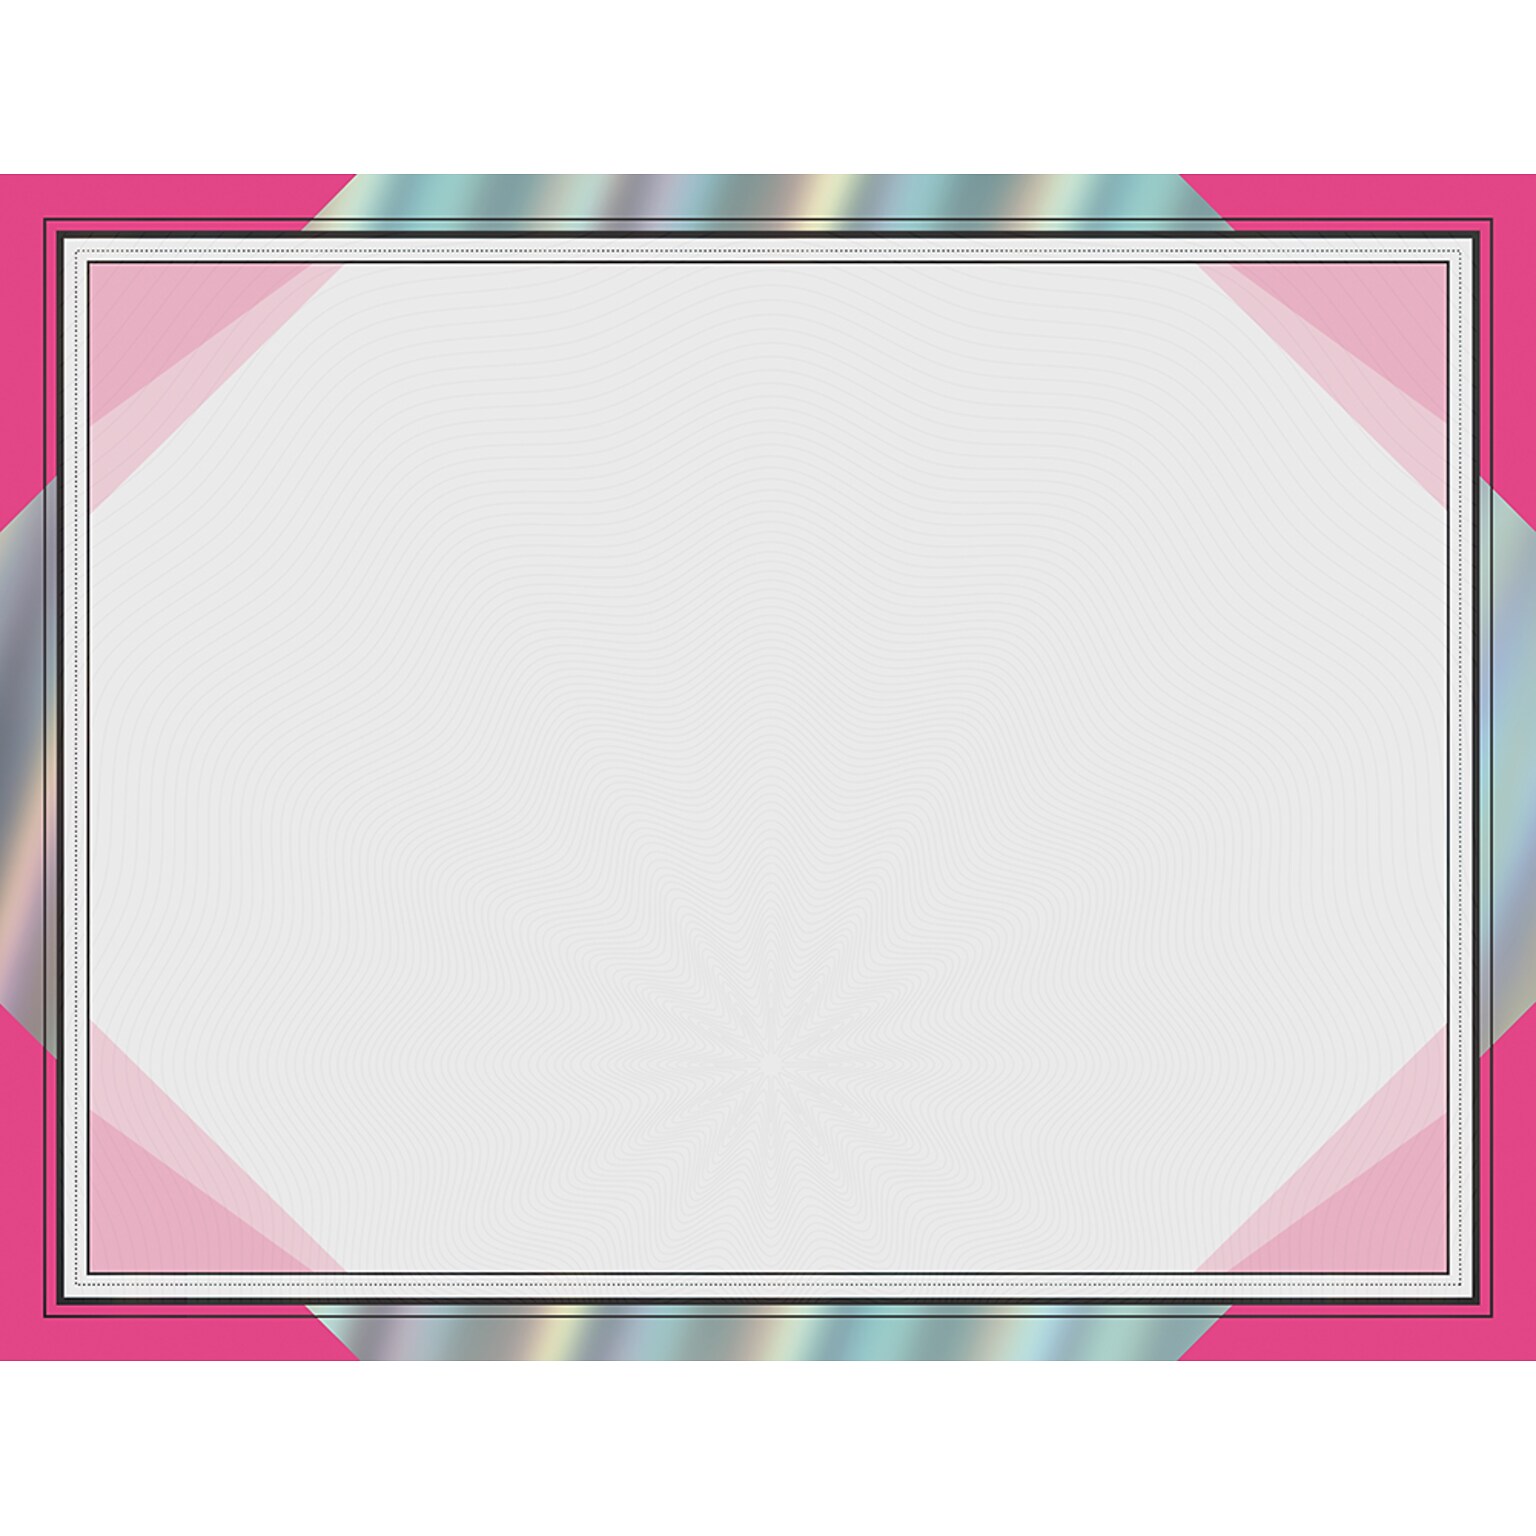 Great Papers Rainbow Foil Certificates, 8.5 x 11, Happy Pink, 15/Pack (2019003)